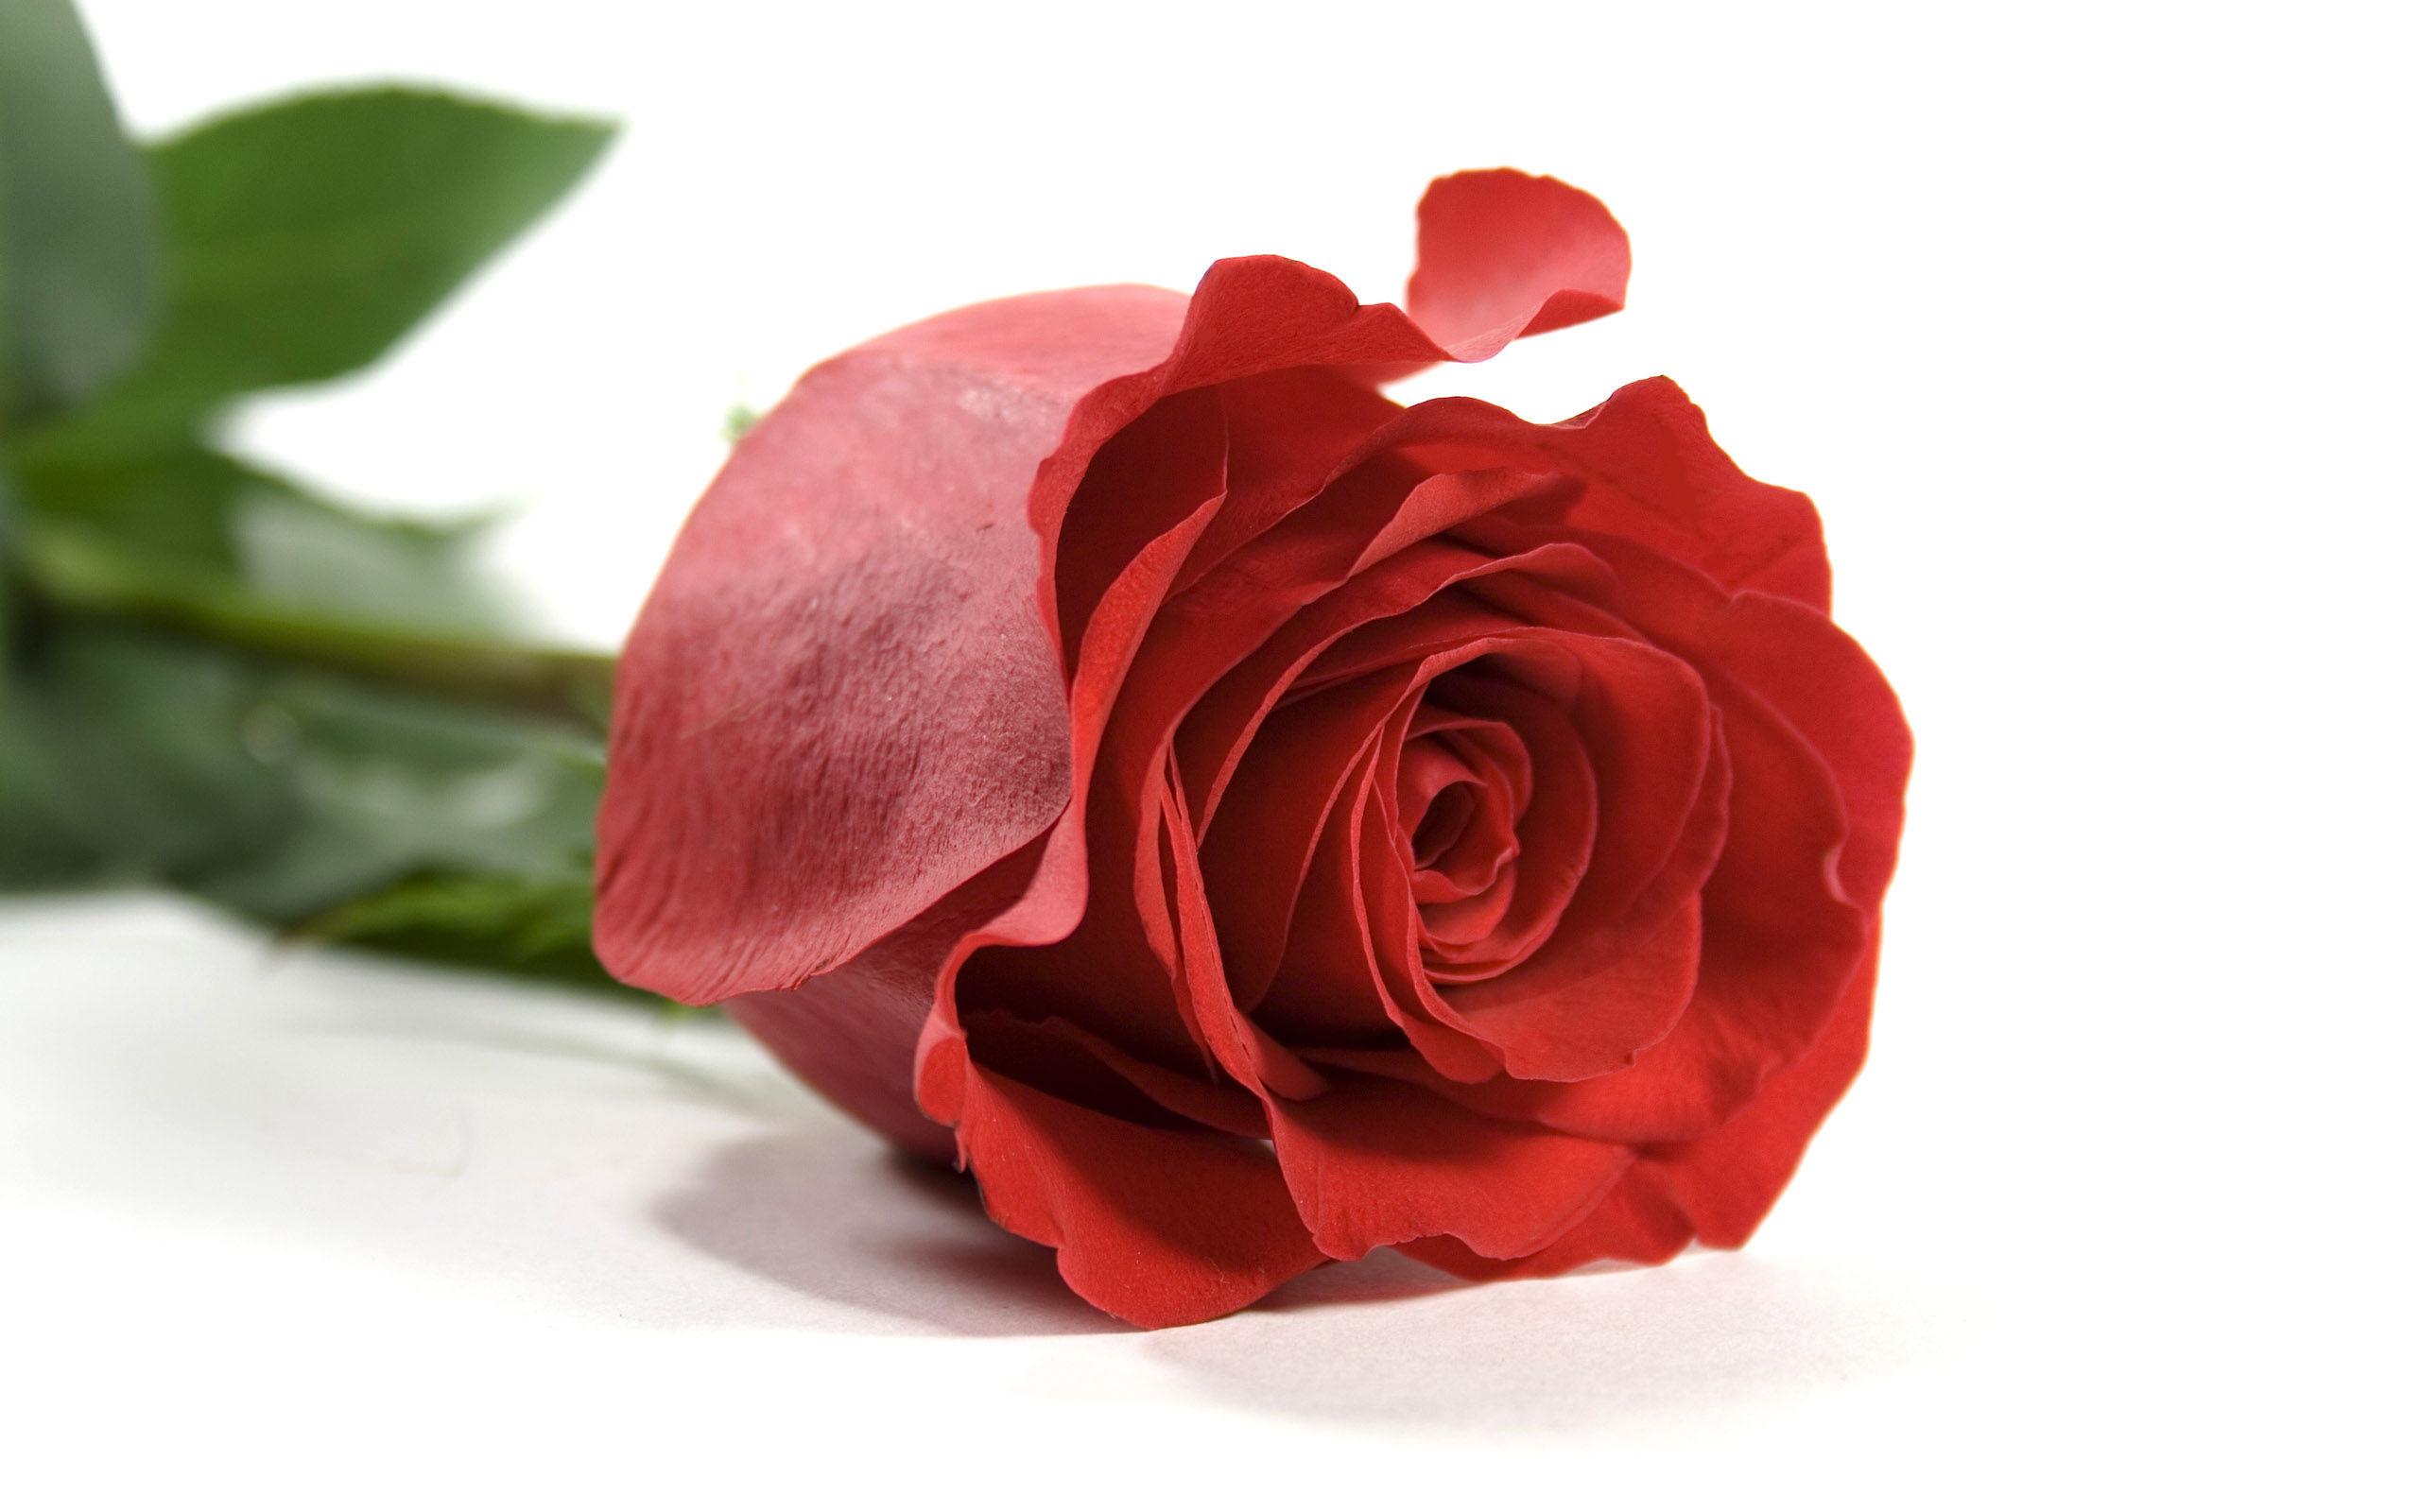 Rose Flower Wallpaper Pictures Image Gallery